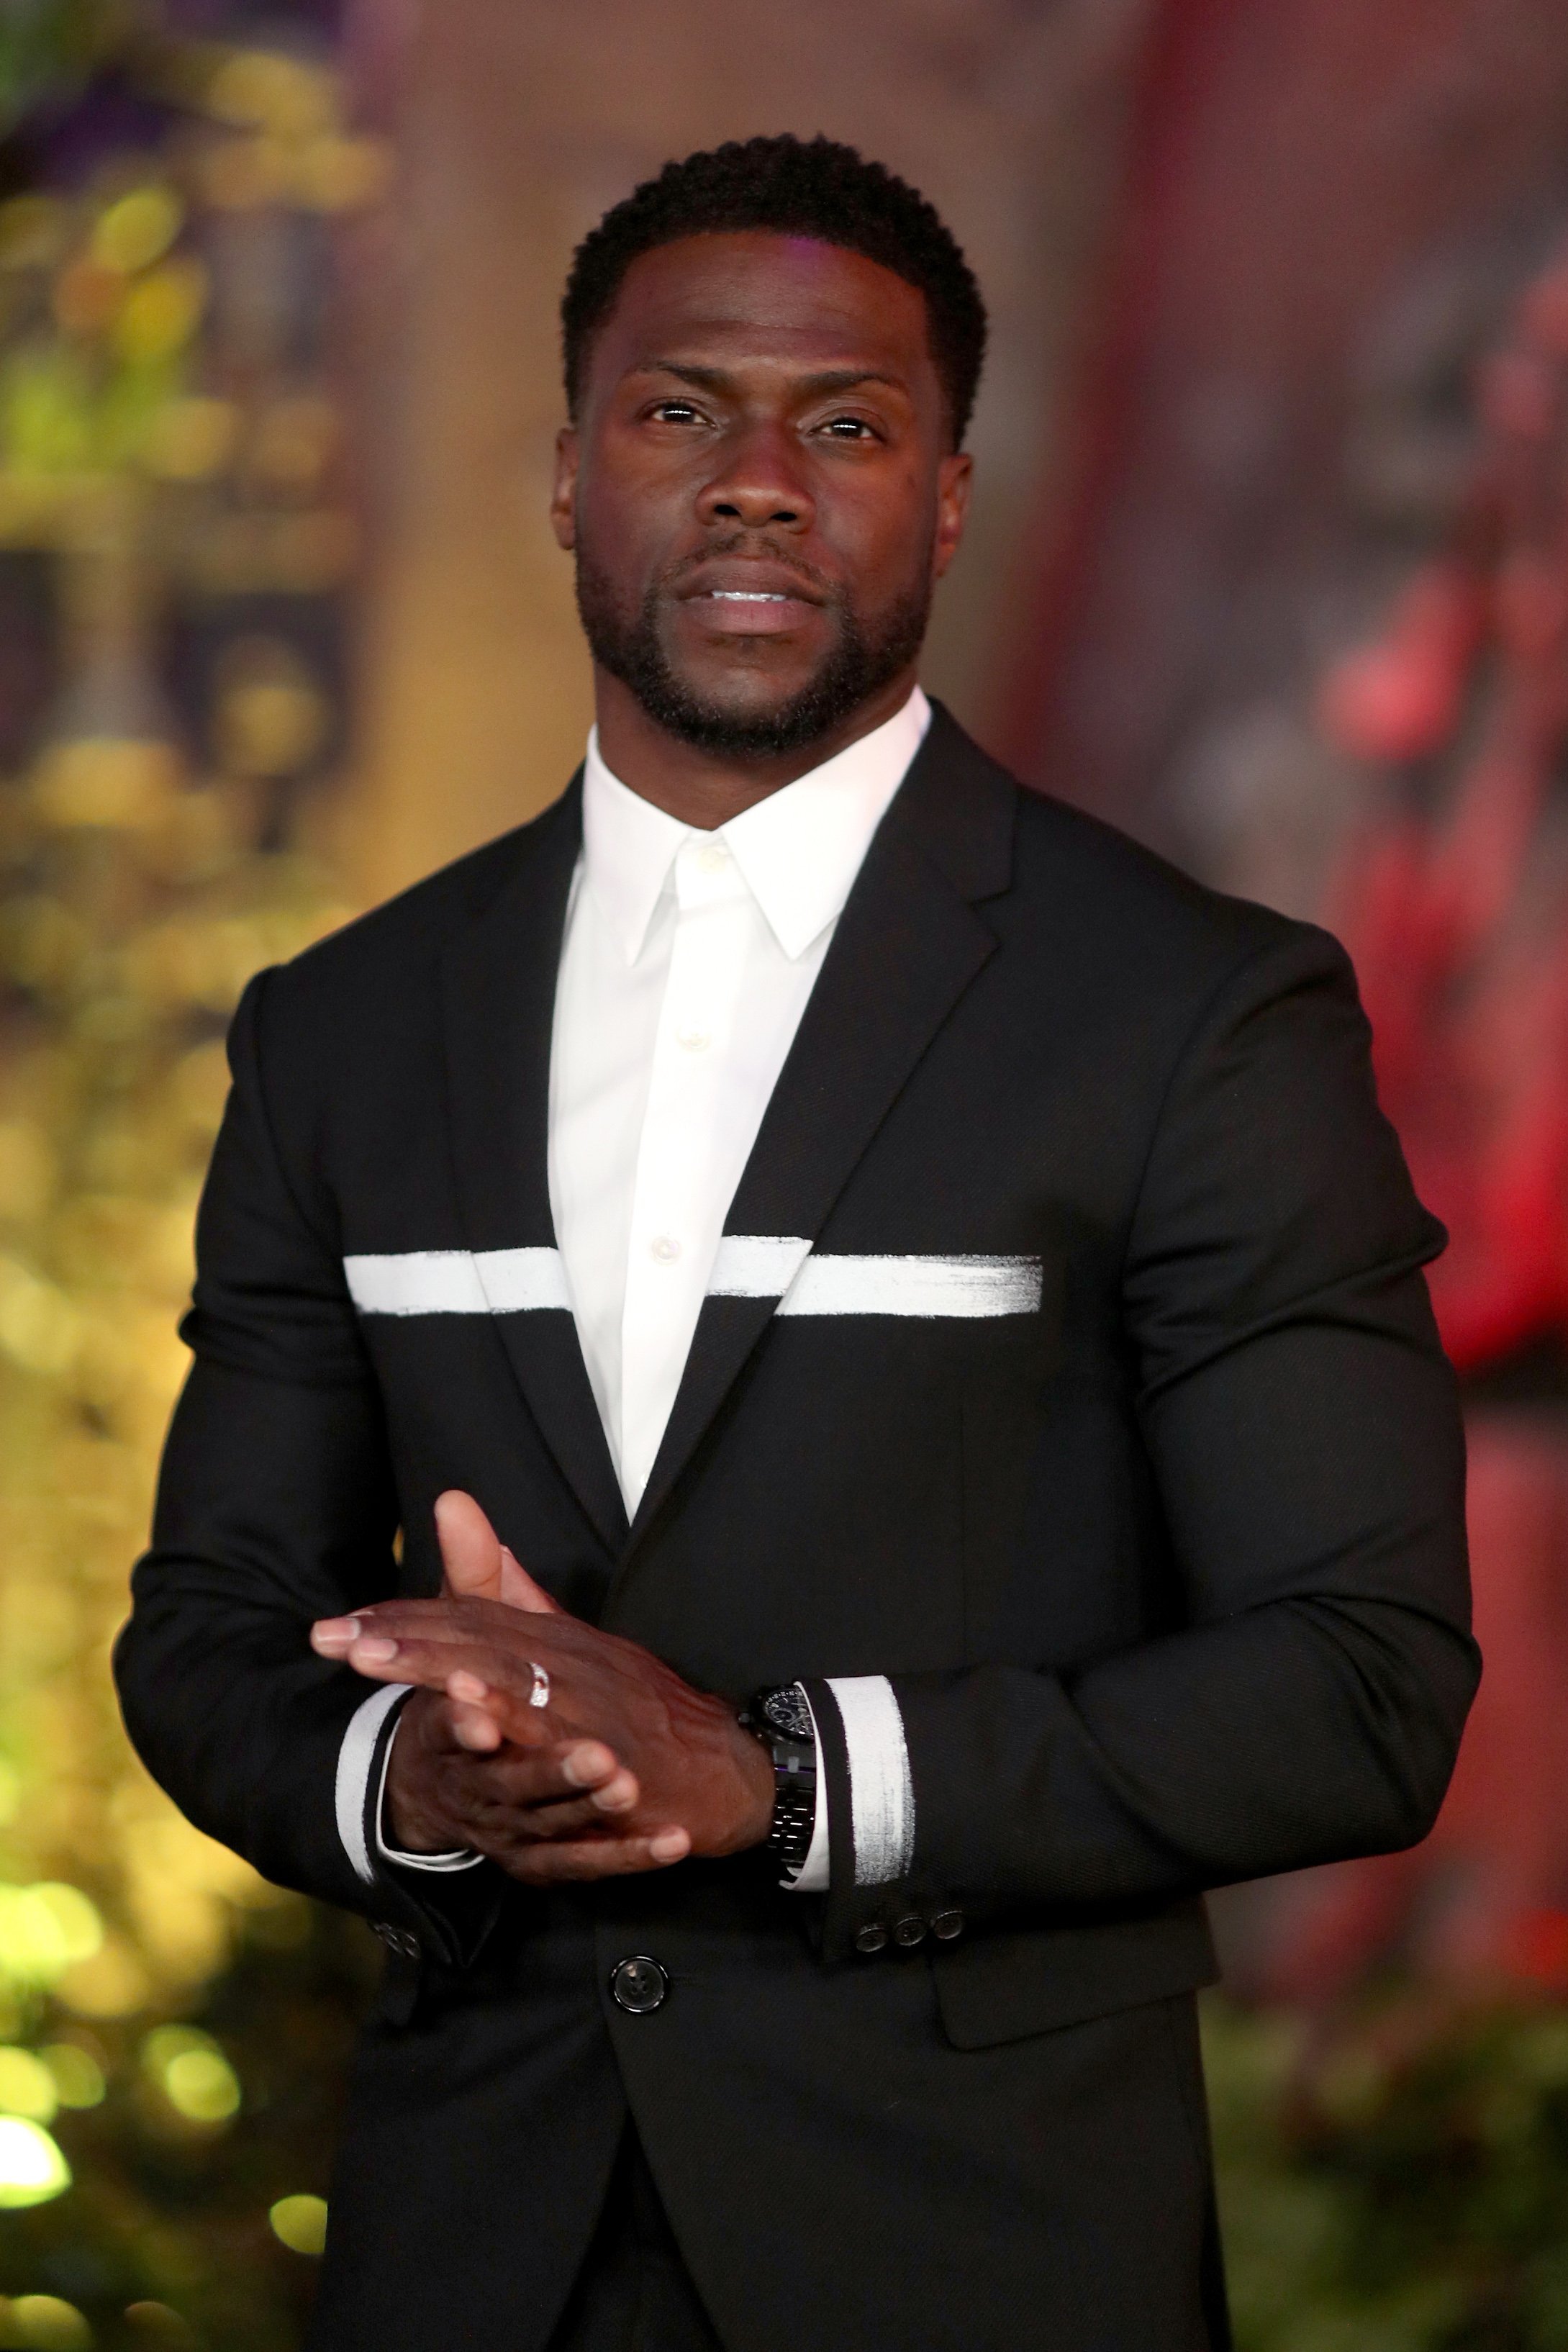 Kevin Hart at the premiere of "Jumanji: Welcome To The Jungle" on Dec. 11, 2017 in California | Photo: Getty Images